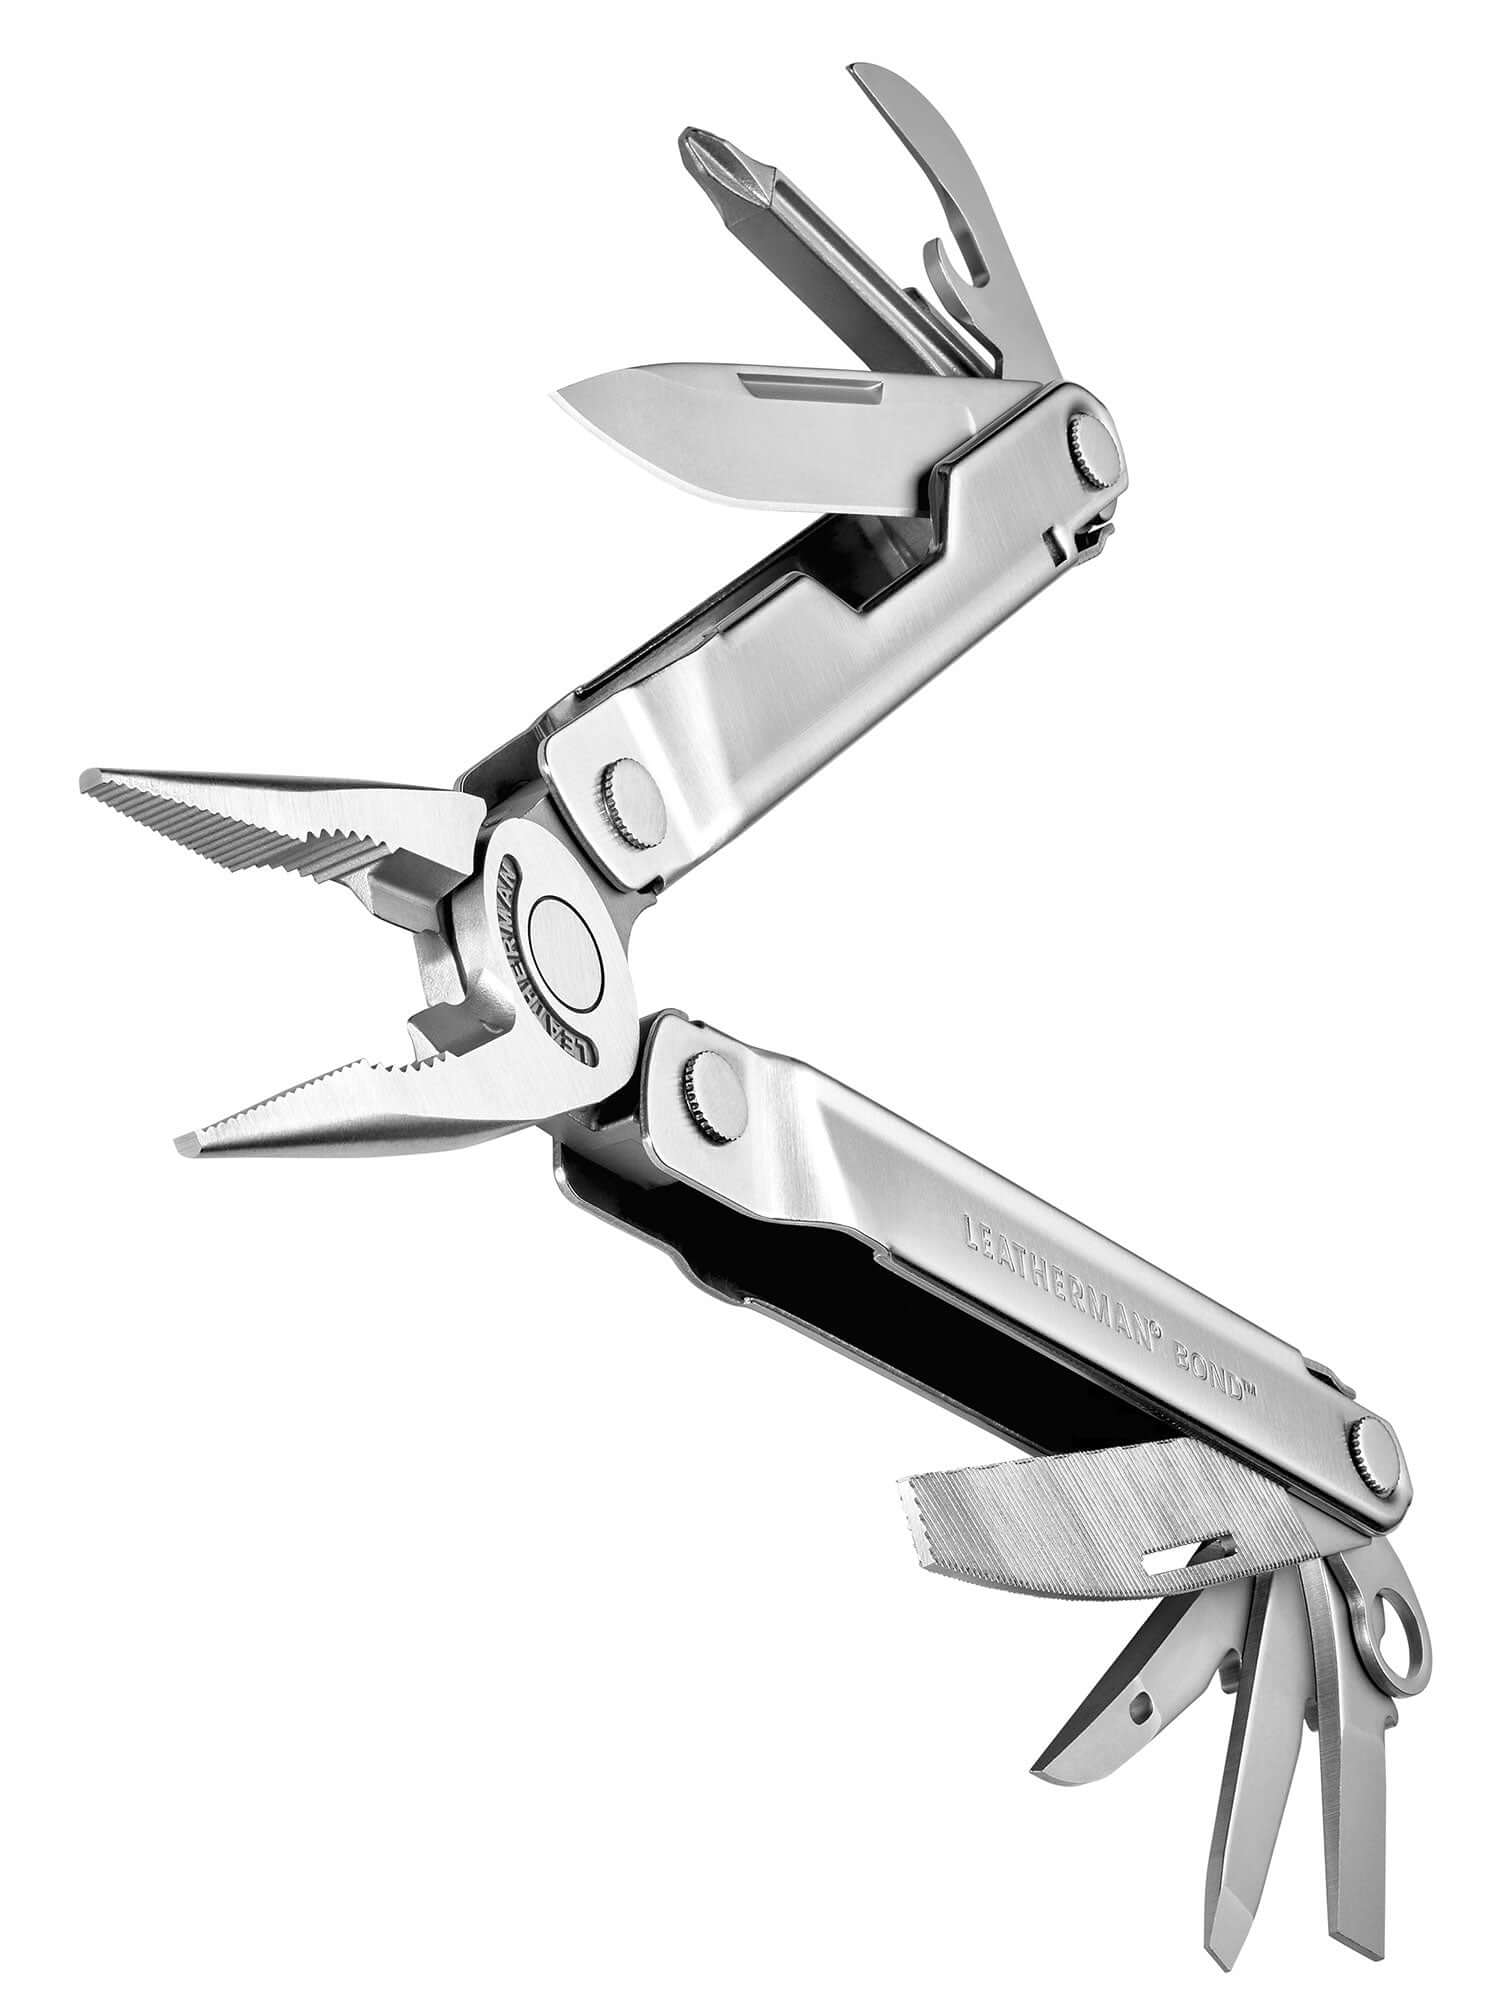 The Bond Every Day Carry Multi-Tool by Leatherman